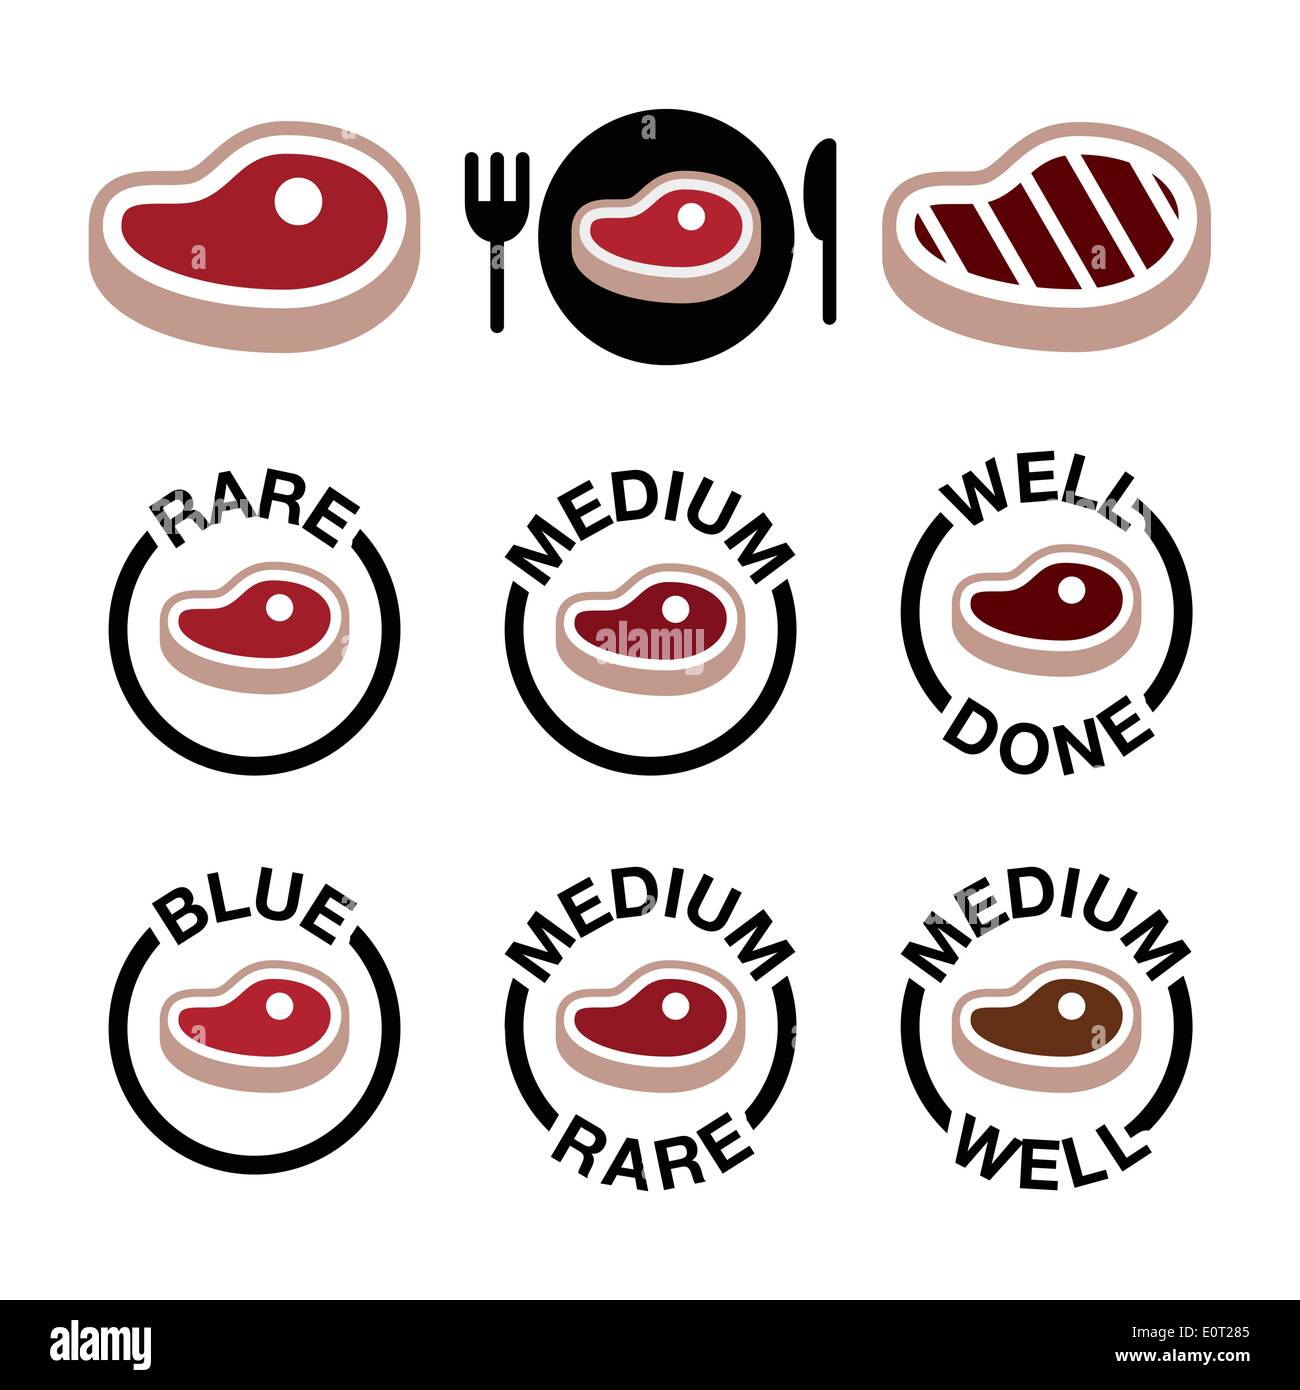 Steak - medium, rare, well done, grilled icons set Stock Vector